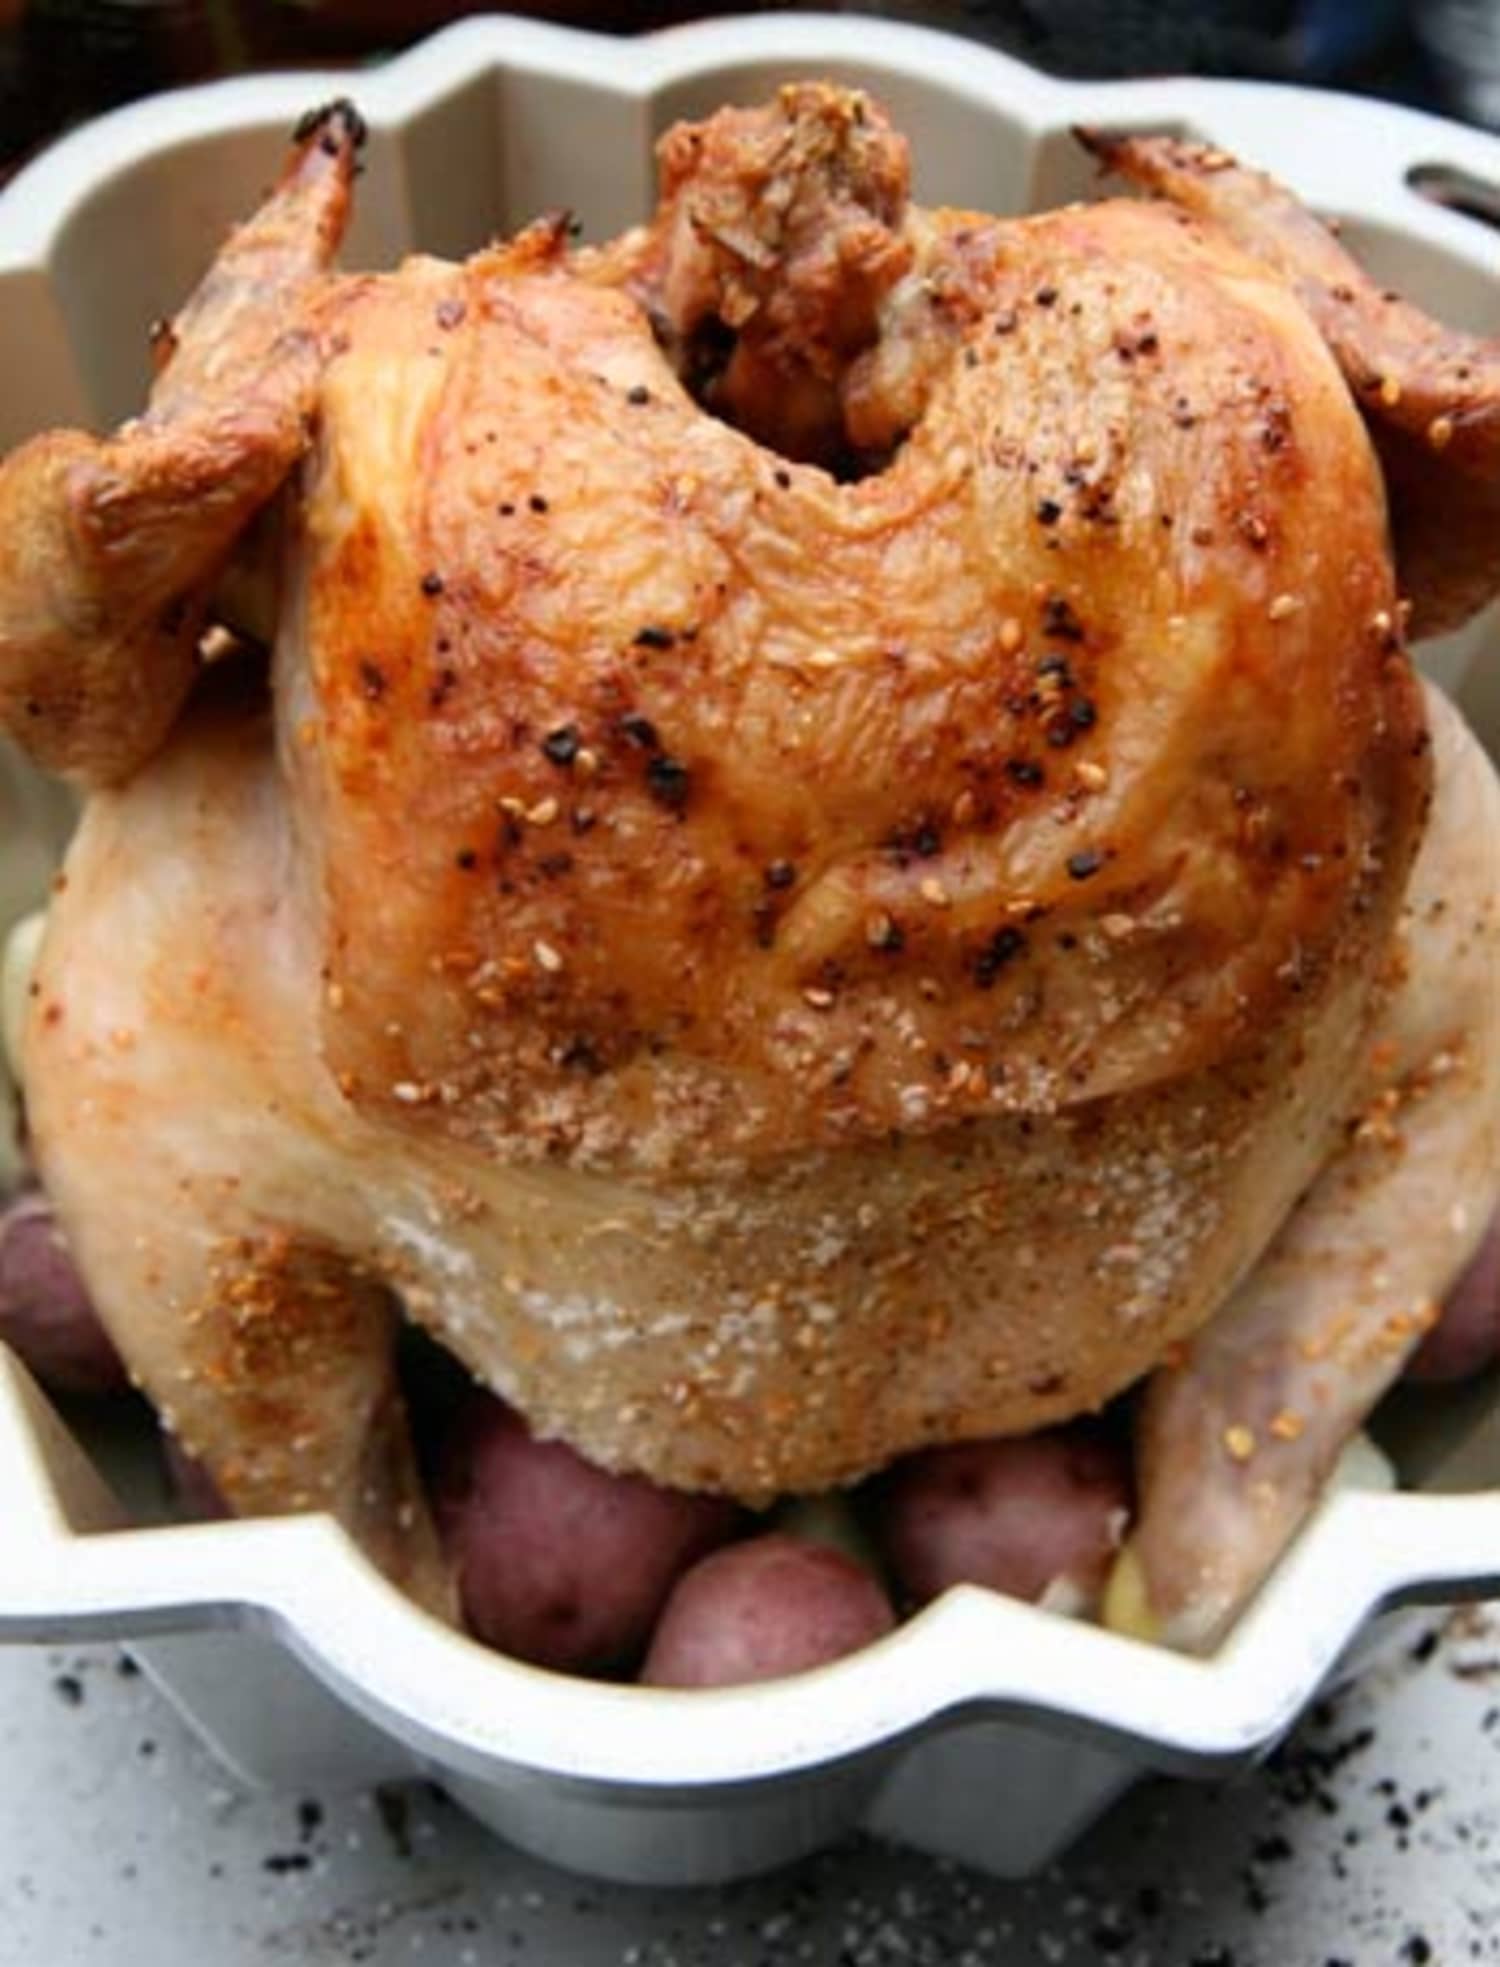 The Naughty Way to Roast a Chicken